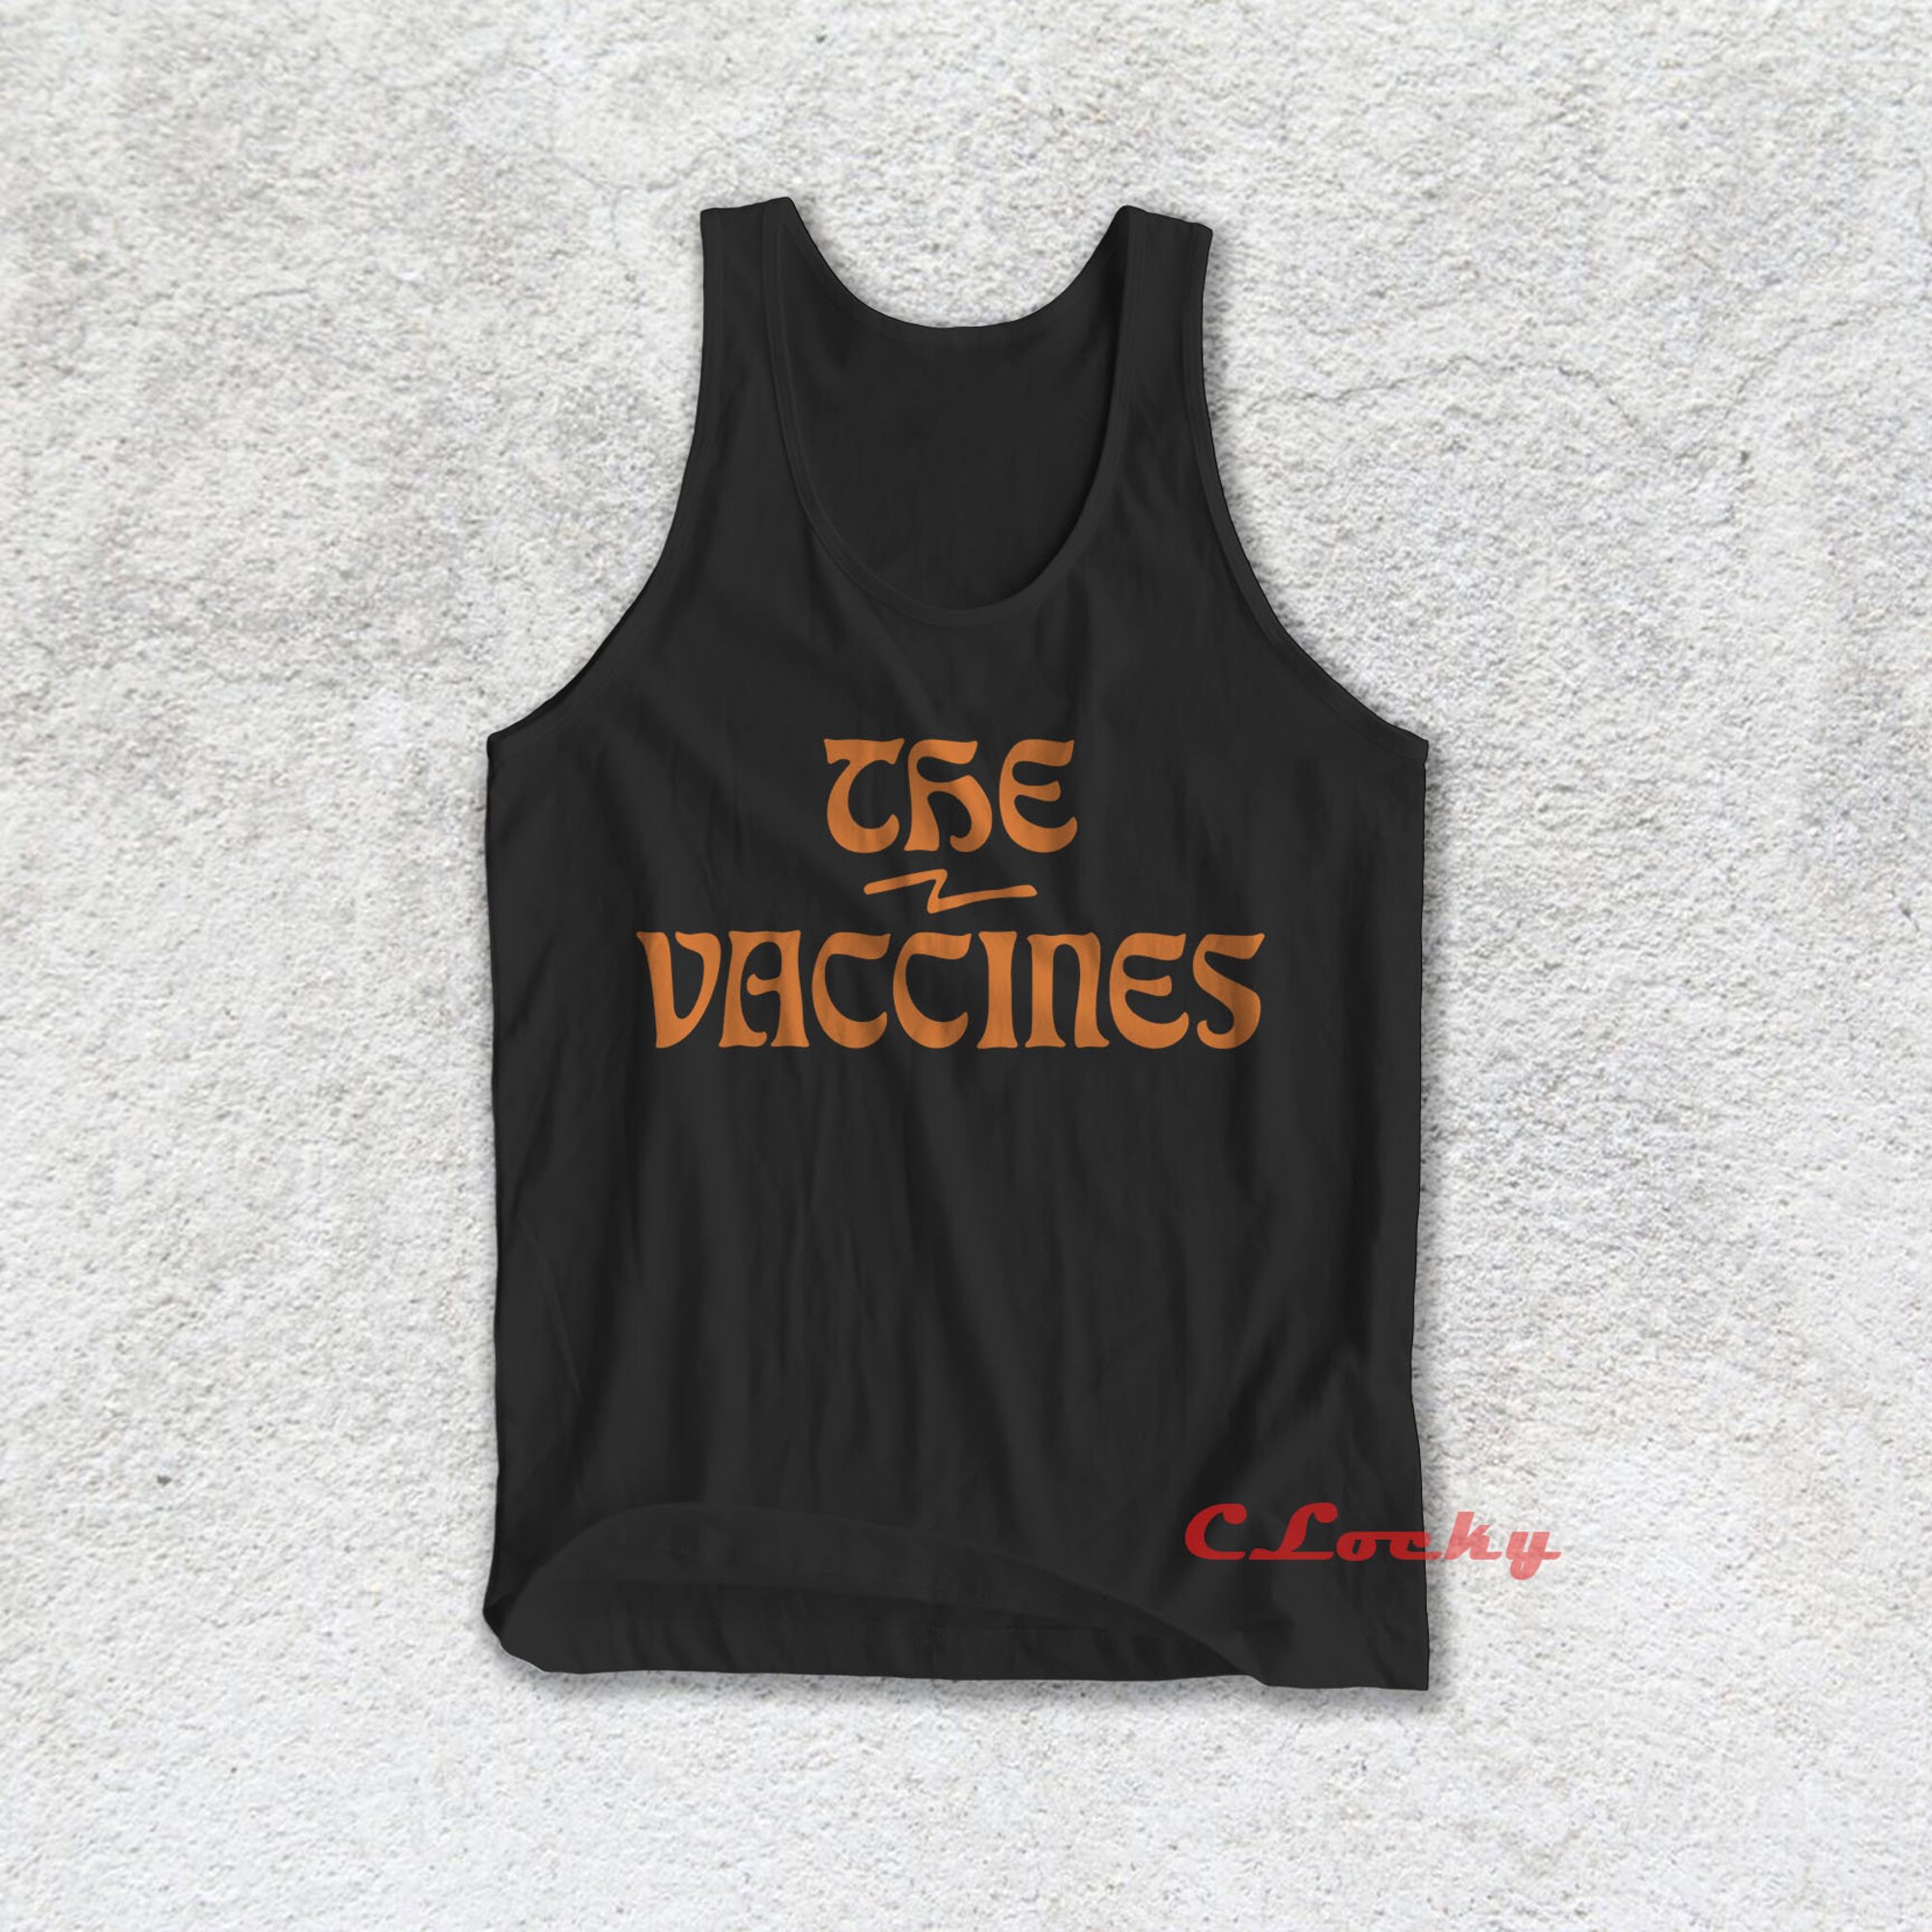 Discover The Vaccines Tank Top English Indie Rock Justin Young Music Band Tank Top